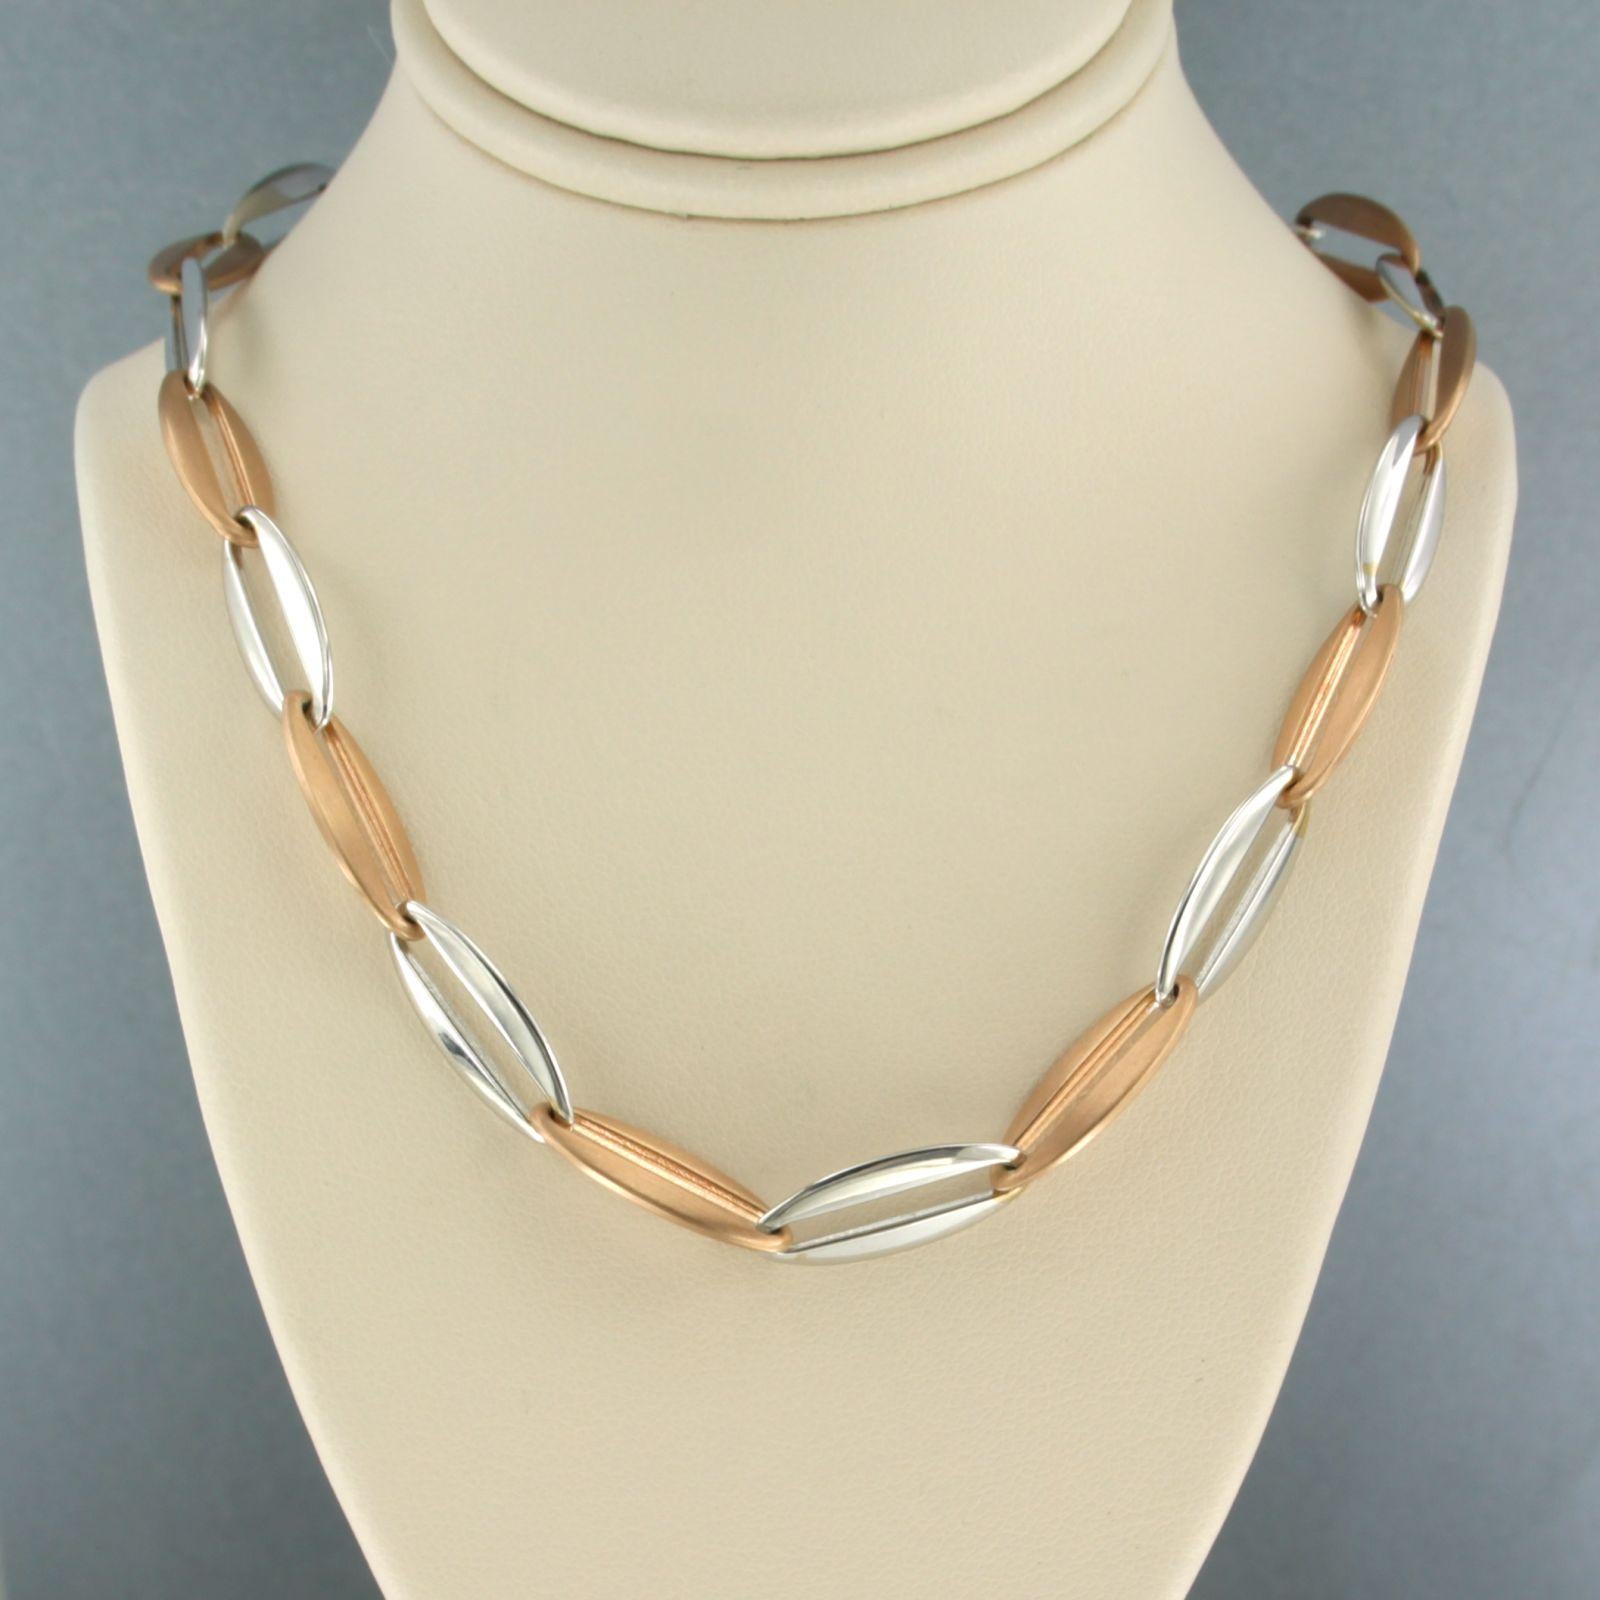 14k bicolour gold link necklace - 45 cm long

detailed description:

necklace is 45 cm long and 0.7 cm wide

total weight: 16.0 grams

hallmark present, tested and guaranteed 14k gold

necklace is in good condition
B14704